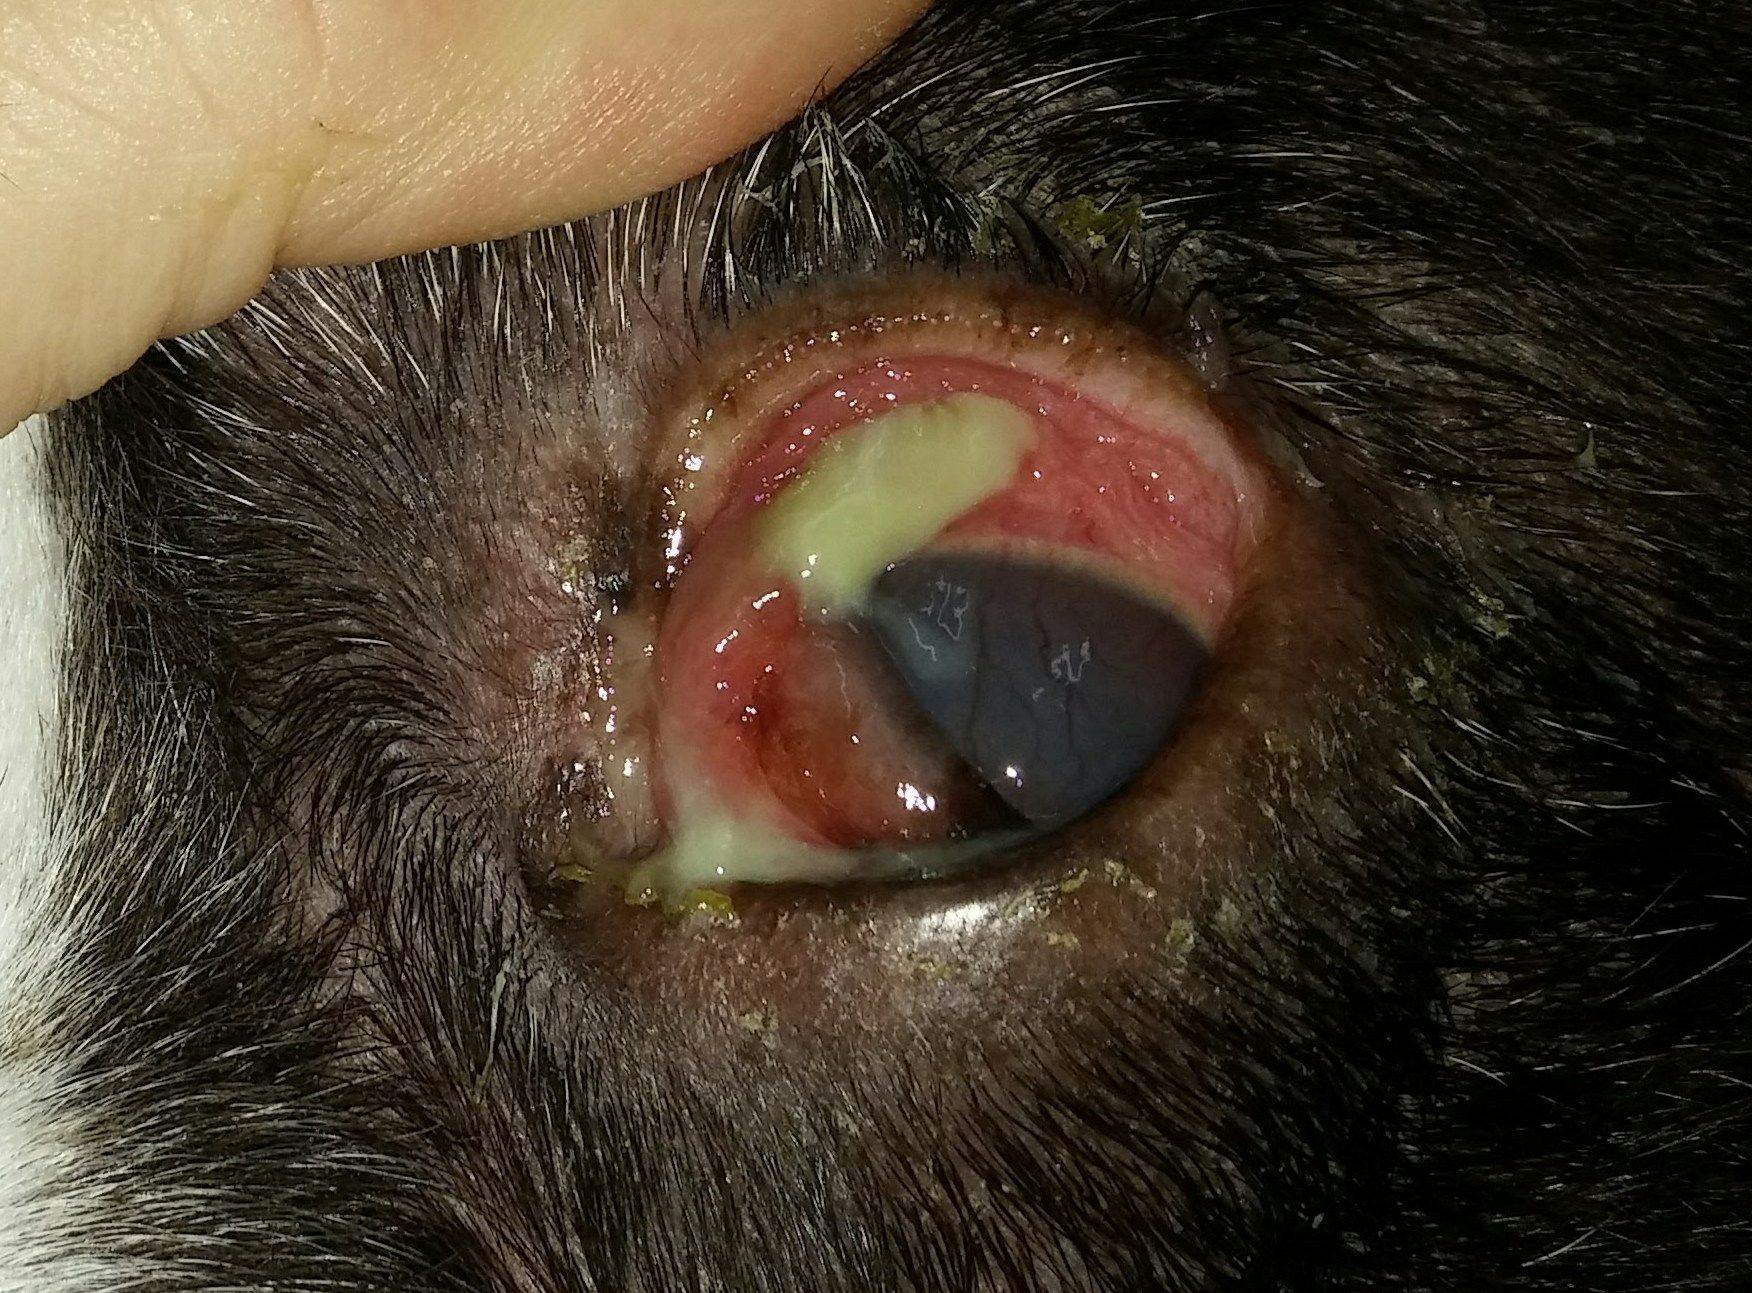 Figure 1. Purulent discharge, conjunctival hyperemia, and corneal vascularization are evident in this dog with KCS.